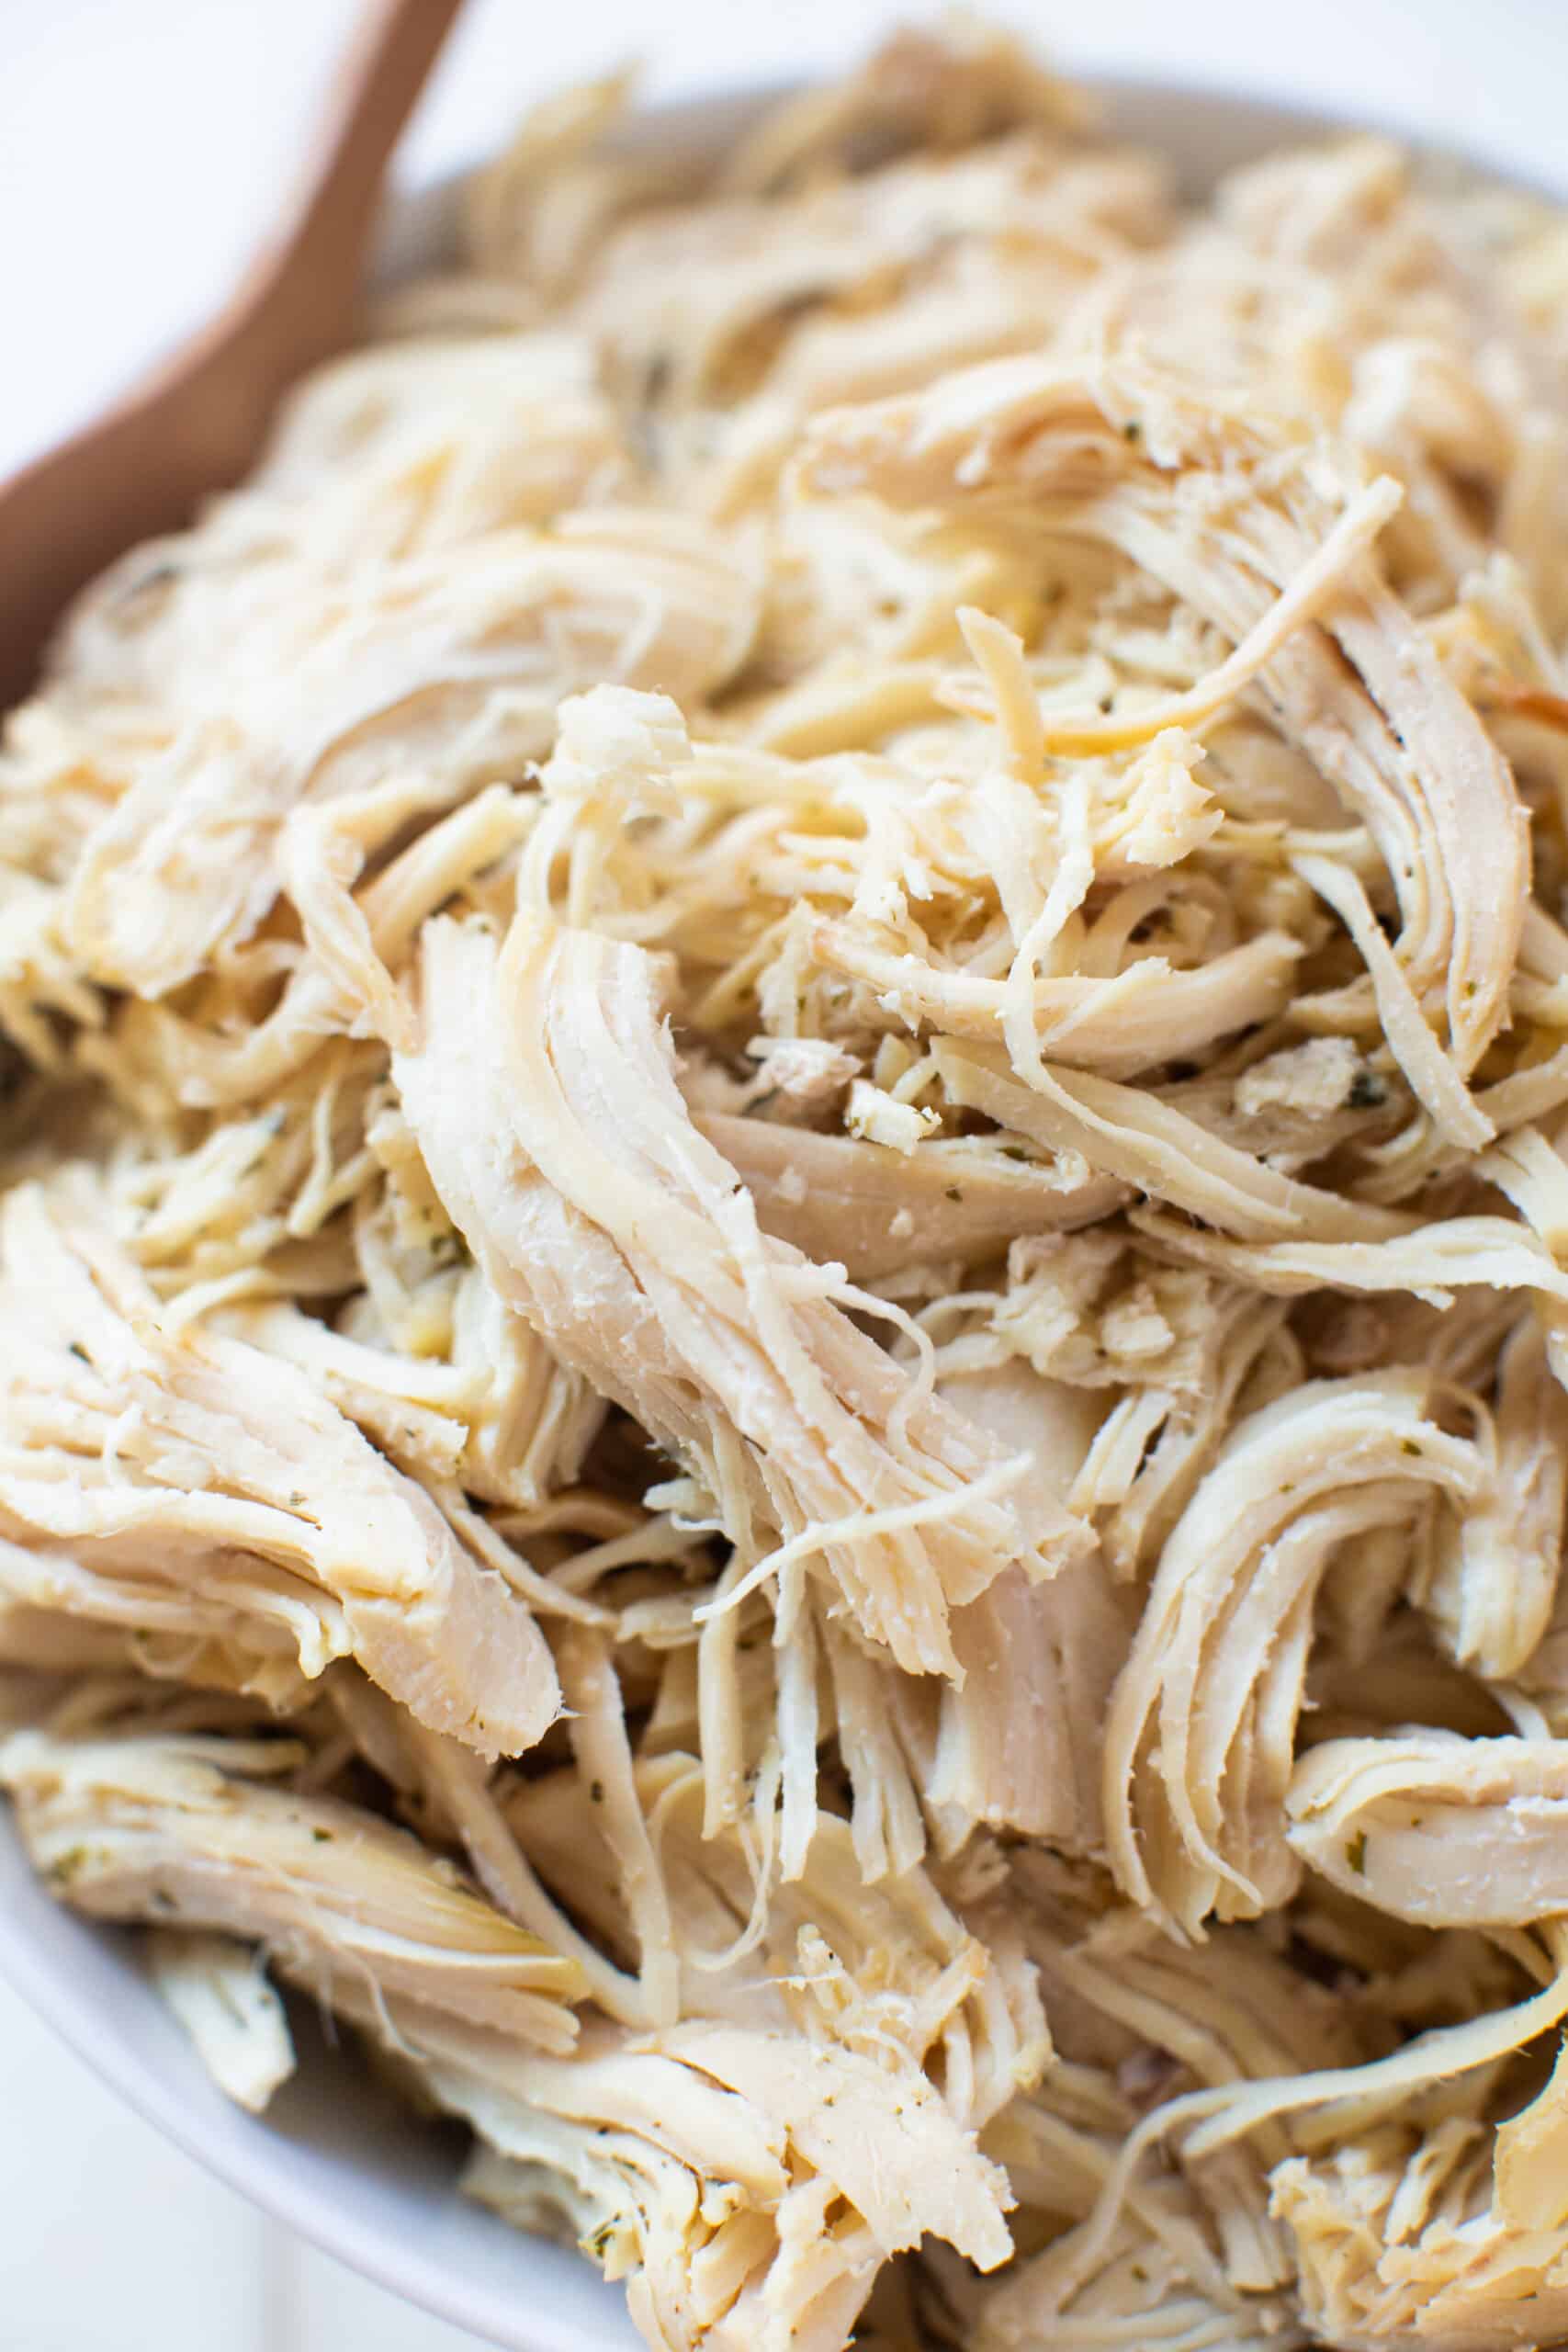 Zoomed in view of shredded chicken in a bowl.